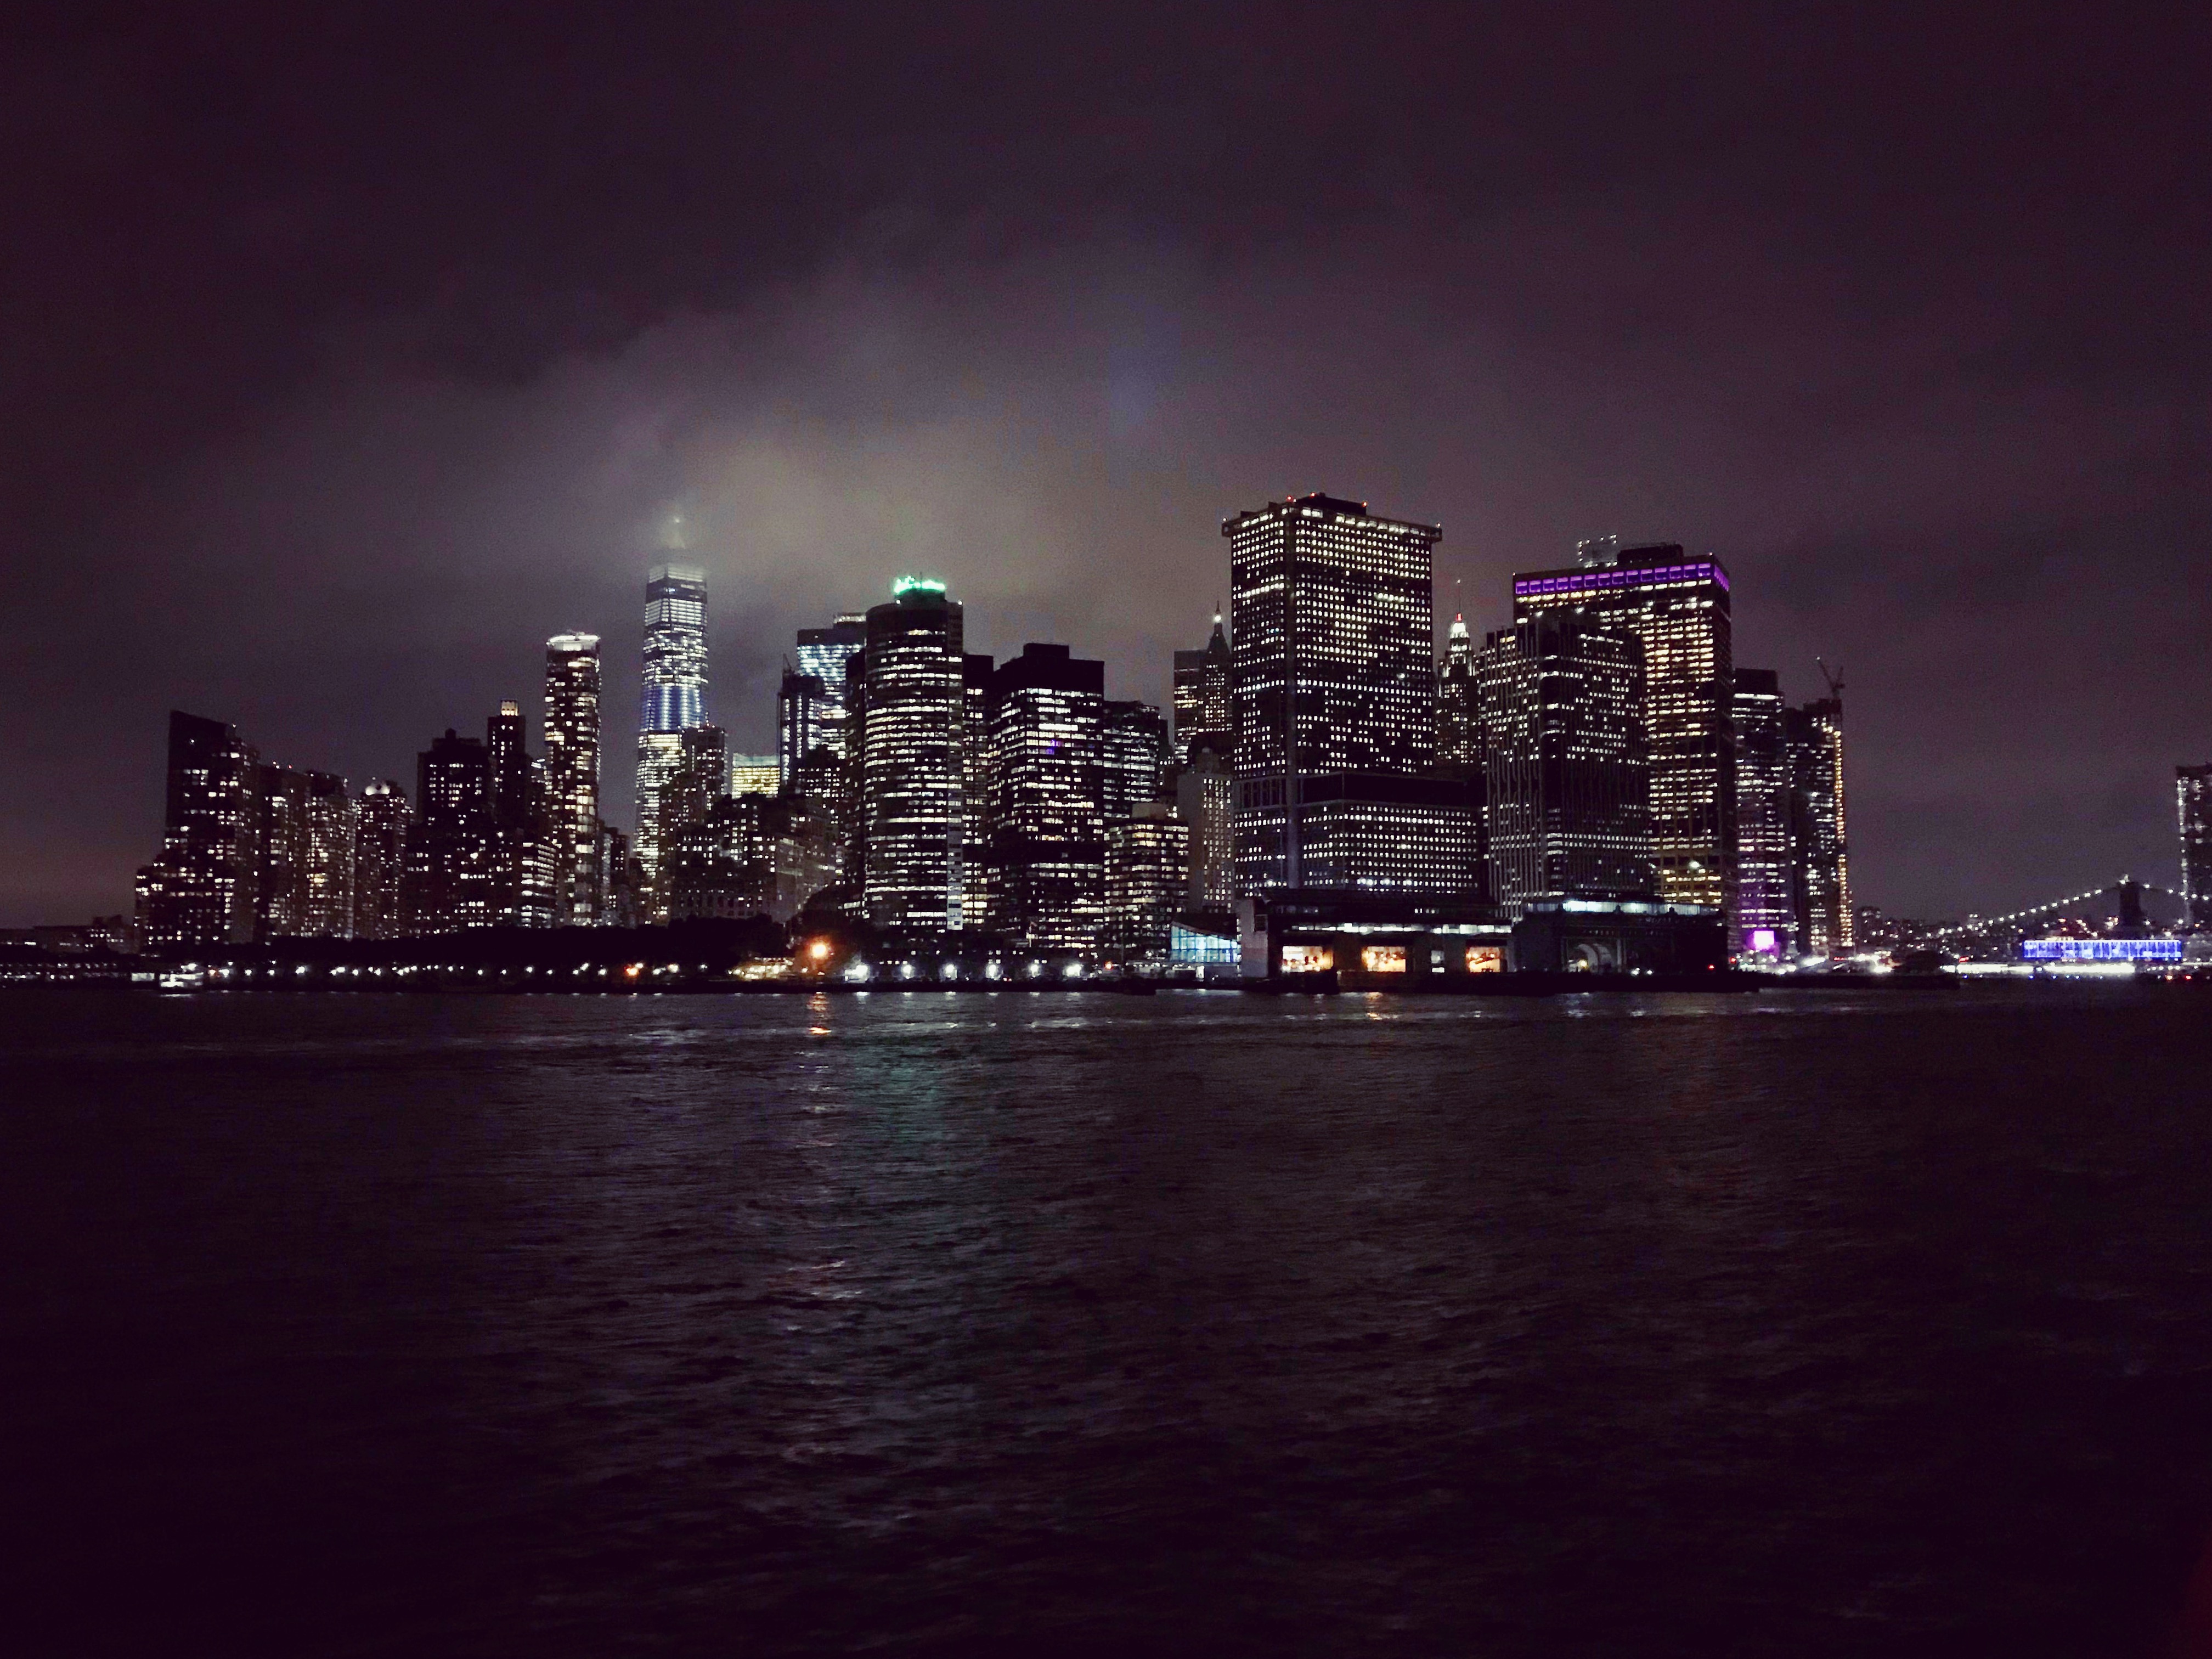 NYC skyline at night from across the river